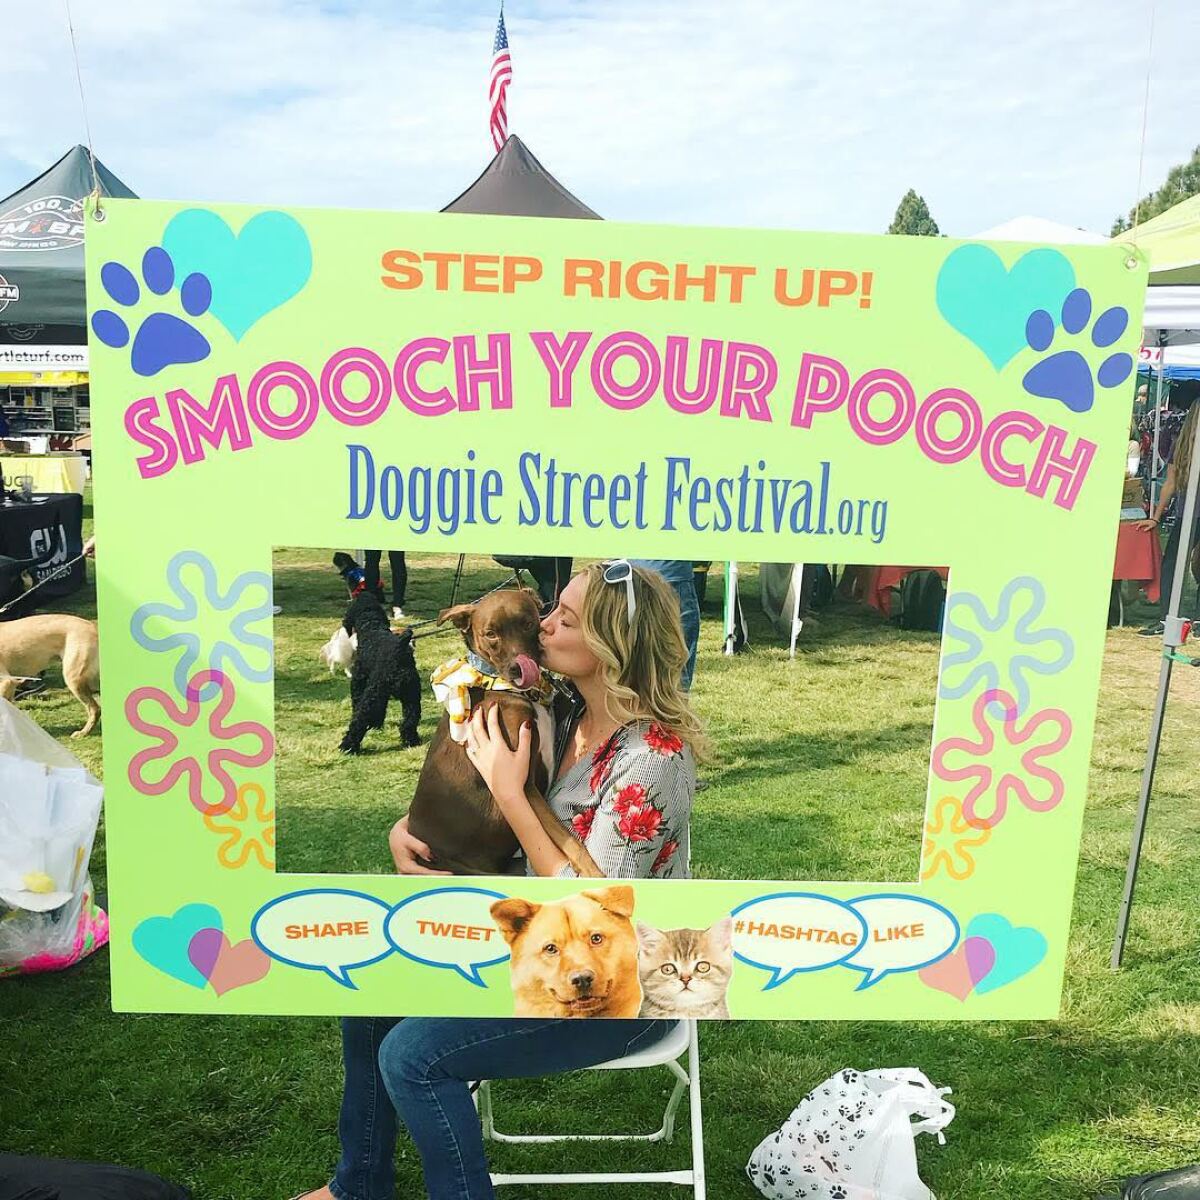 People and pets can attend the 13th annual Doggie Street Festival San Diego at Liberty Station on Saturday, Nov. 19.